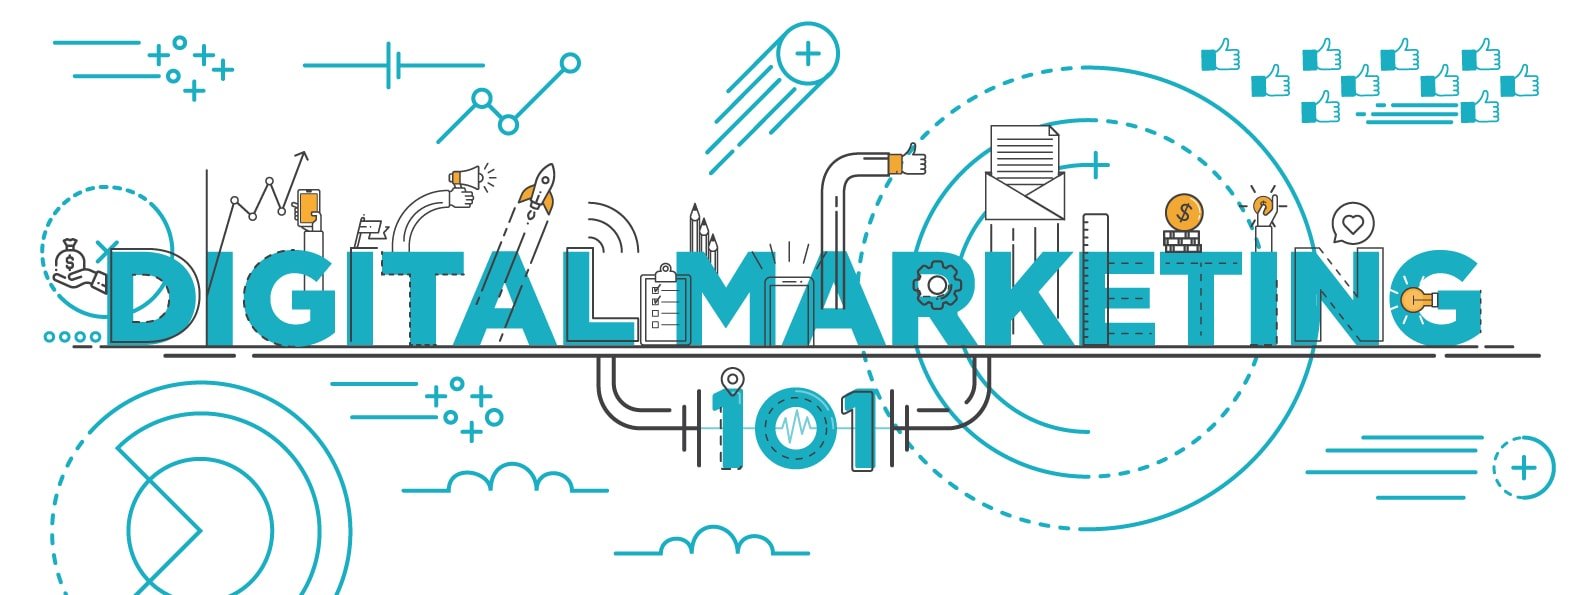 More Traffic, More Deals: Our Version of Digital Marketing 101